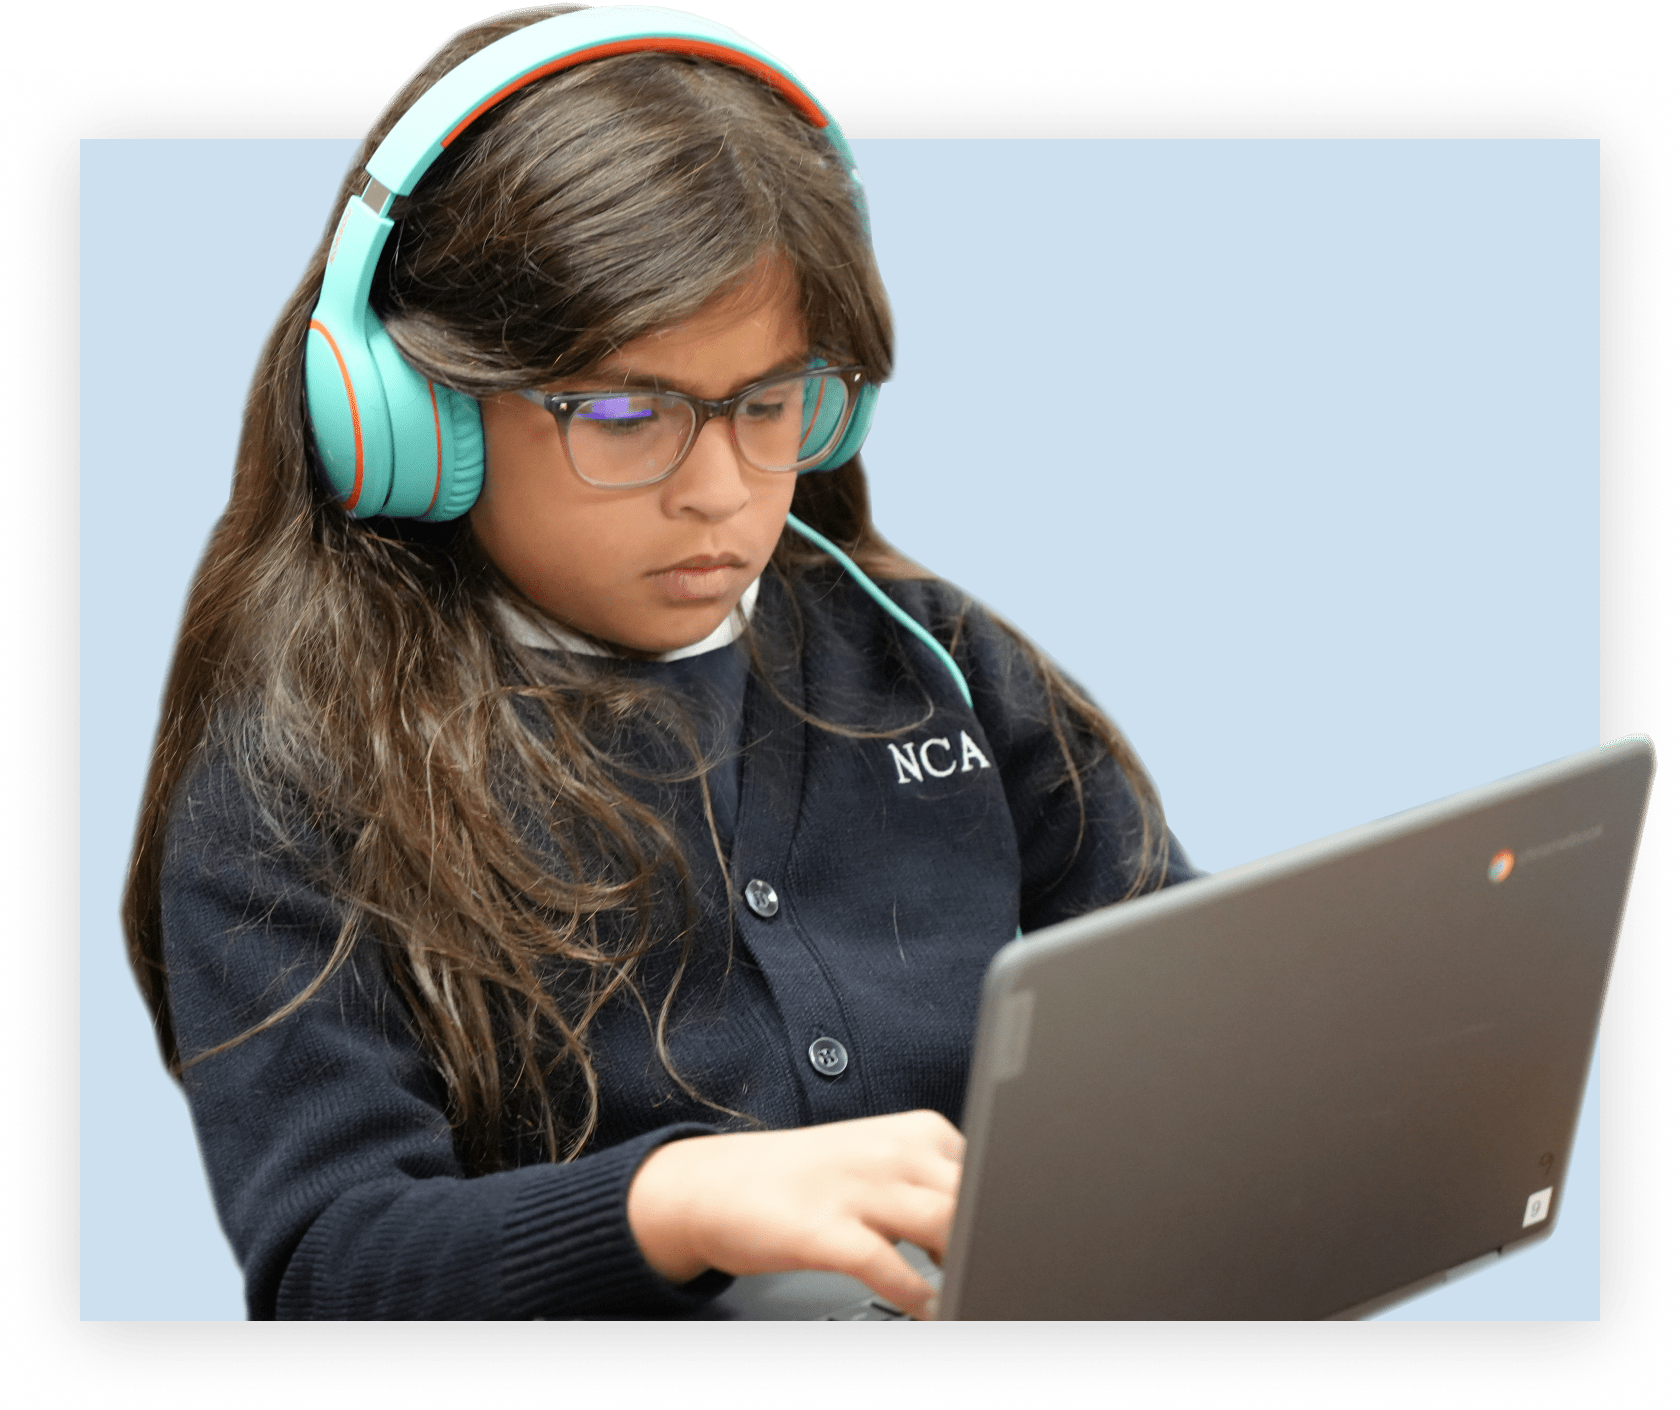 Student with headphones listening to music